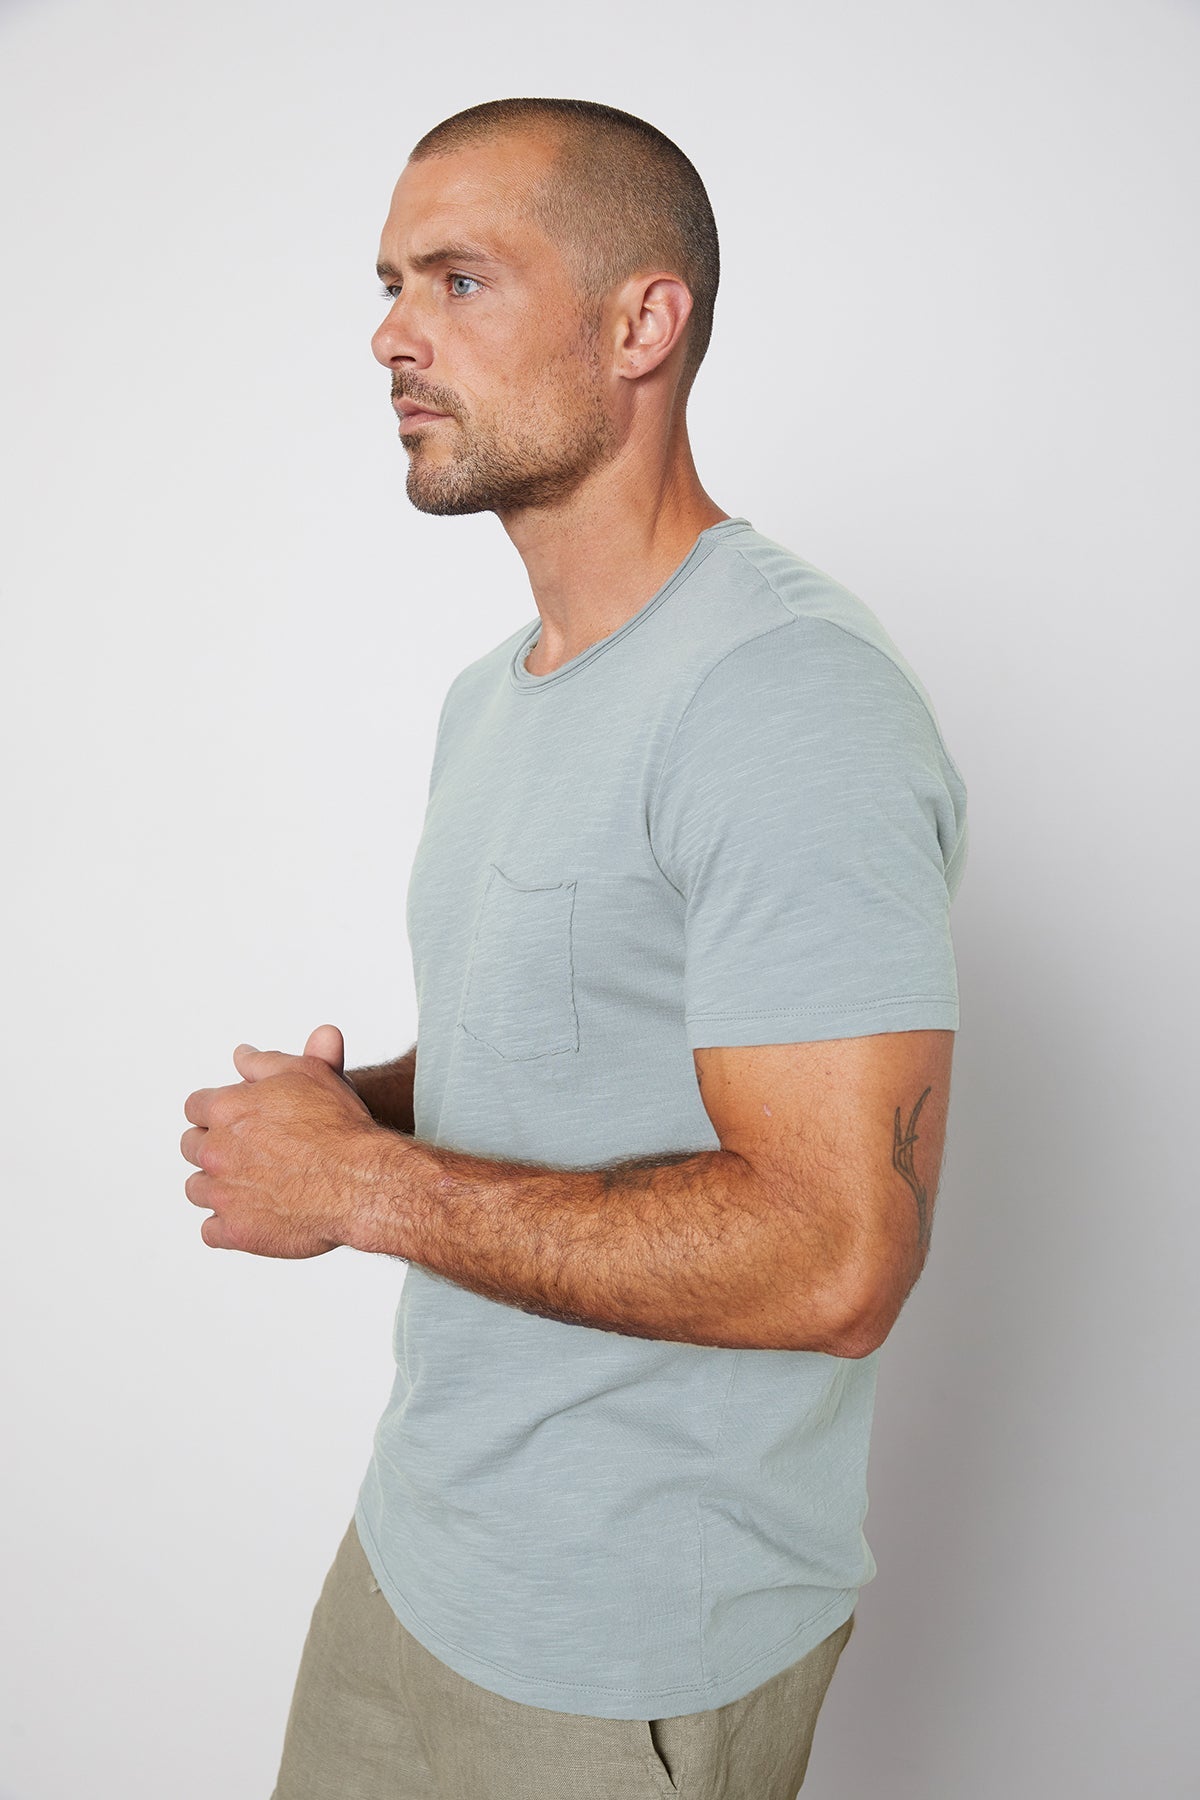 Chad Raw Edge Cotton Slub Pocket Tee in riptide with Jonathan shorts in olive side-25328431071425